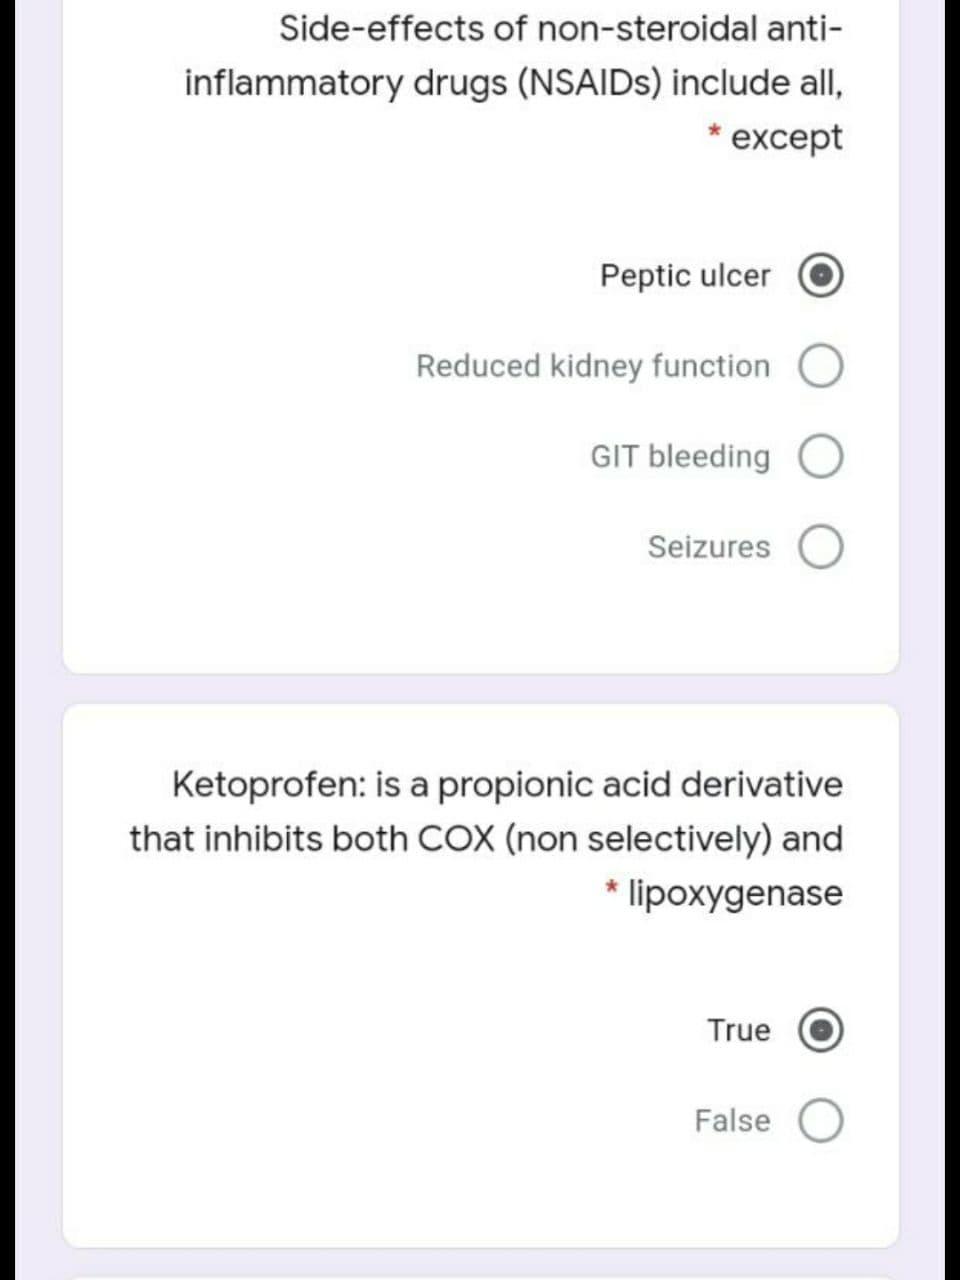 Side-effects of non-steroidal anti-
inflammatory drugs (NSAIDS) include all,
except
Peptic ulcer
Reduced kidney function
GIT bleeding O
Seizures
Ketoprofen: is a propionic acid derivative
that inhibits both COX (non selectively) and
* lipoxygenase
True
False
